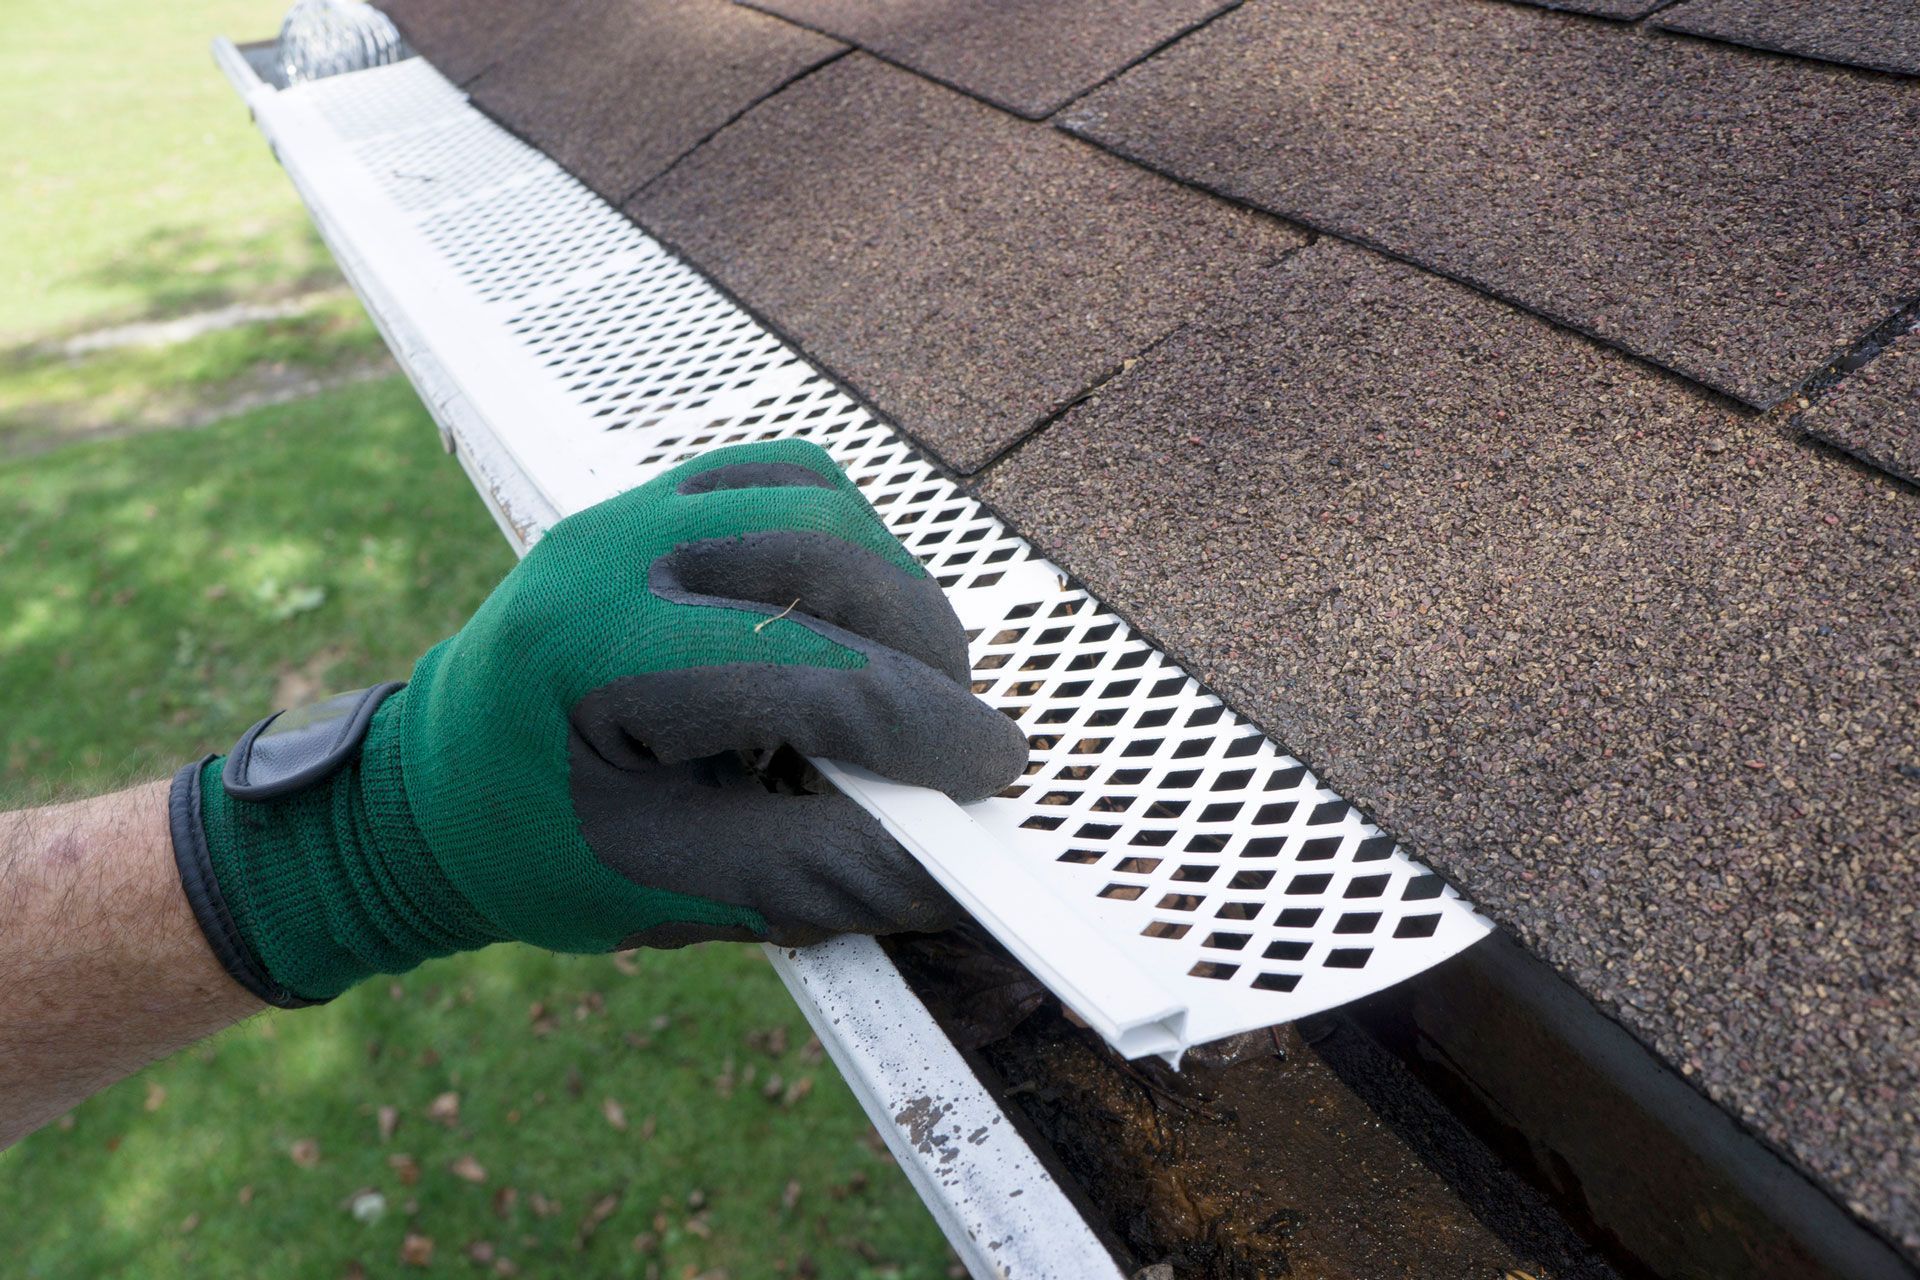 A person wearing gloves is cleaning a gutter on a roof .